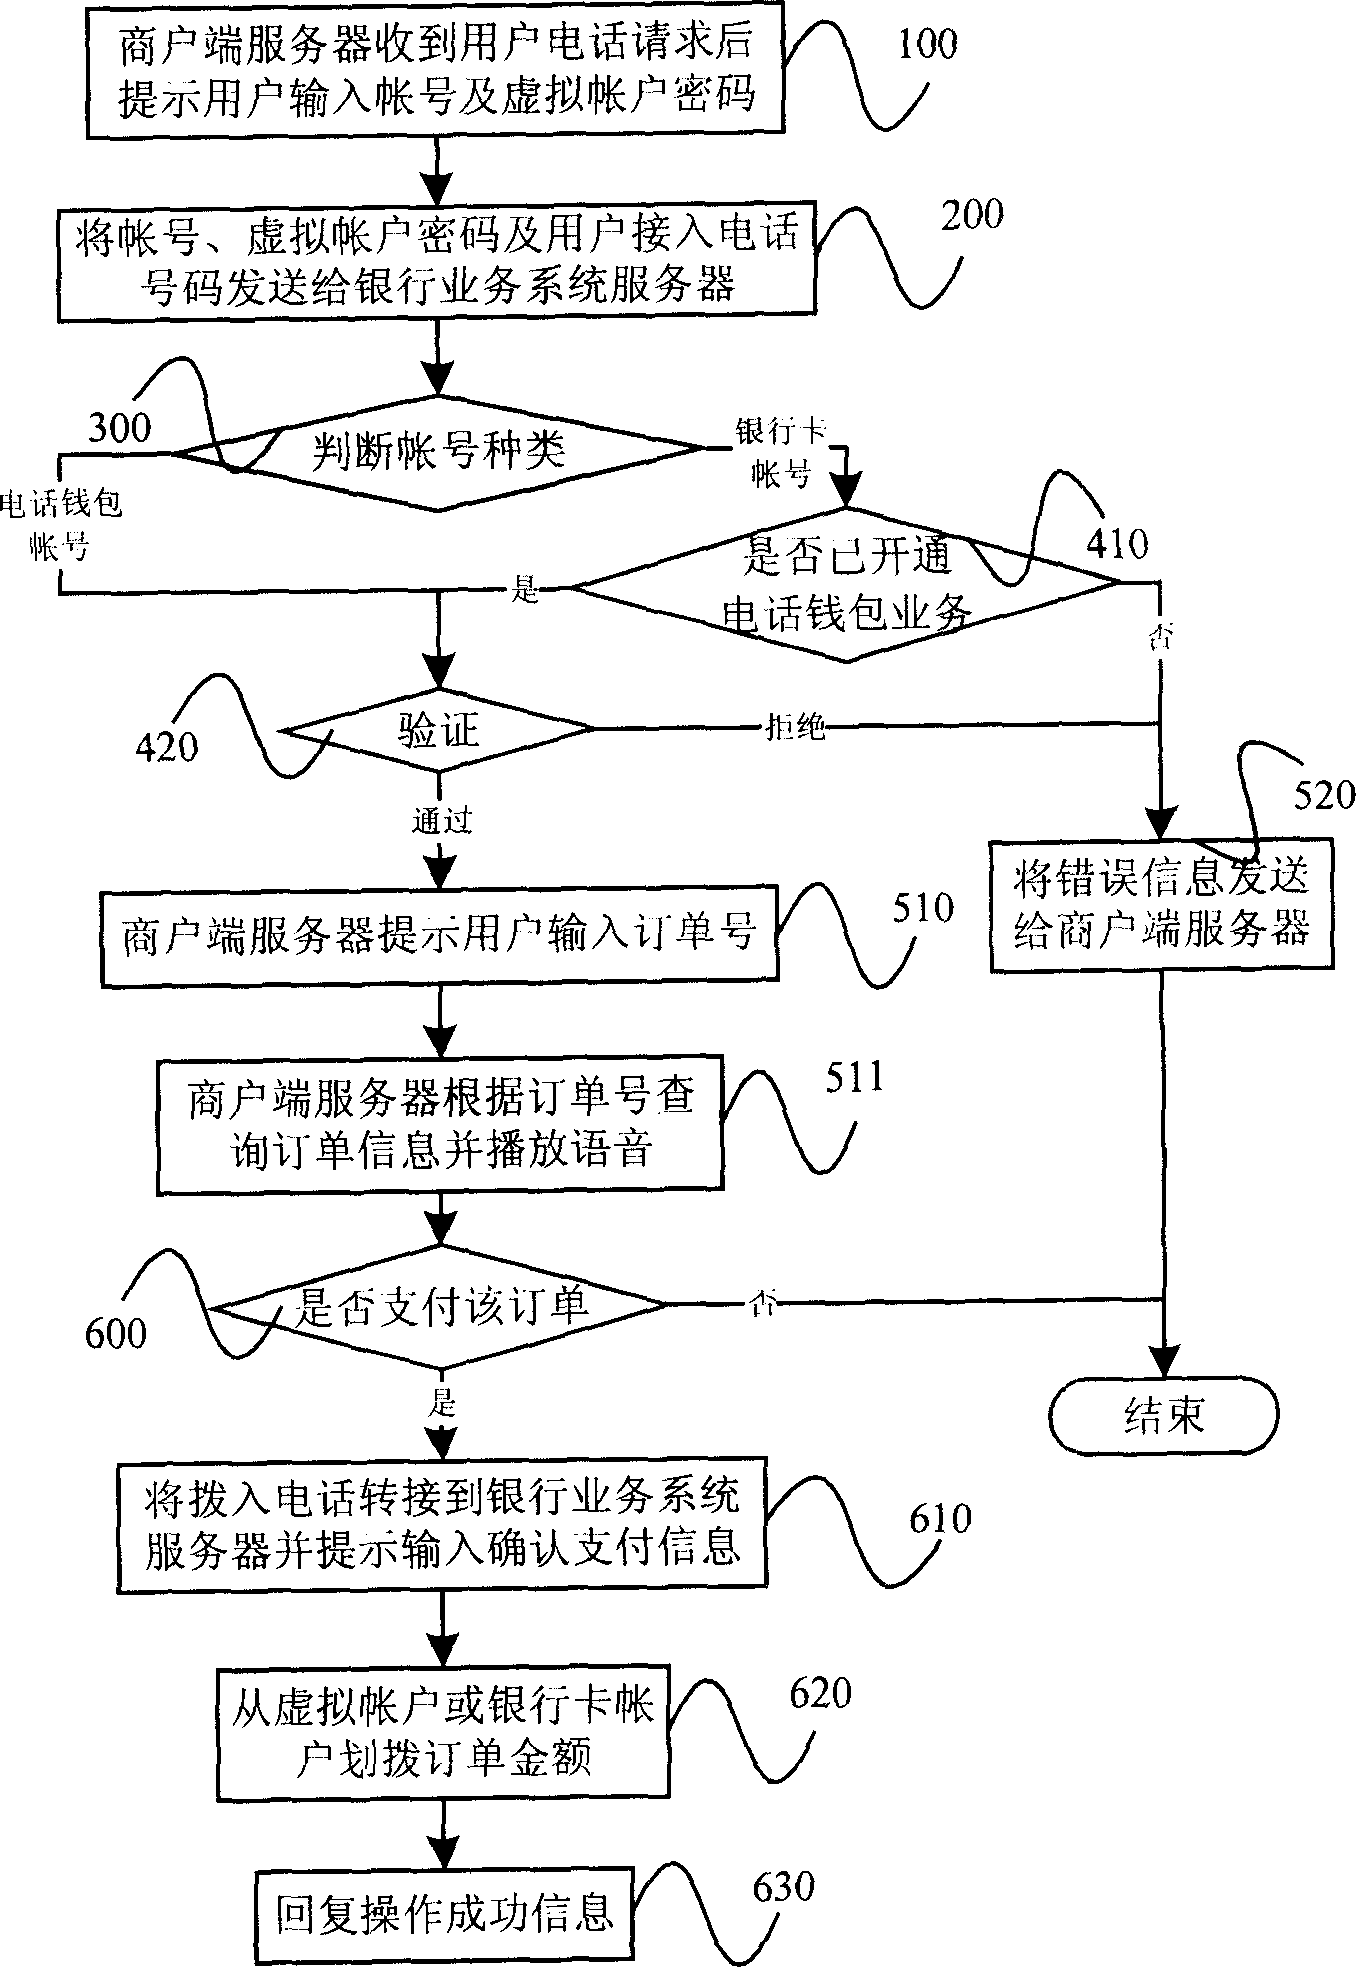 Method for processing payment information